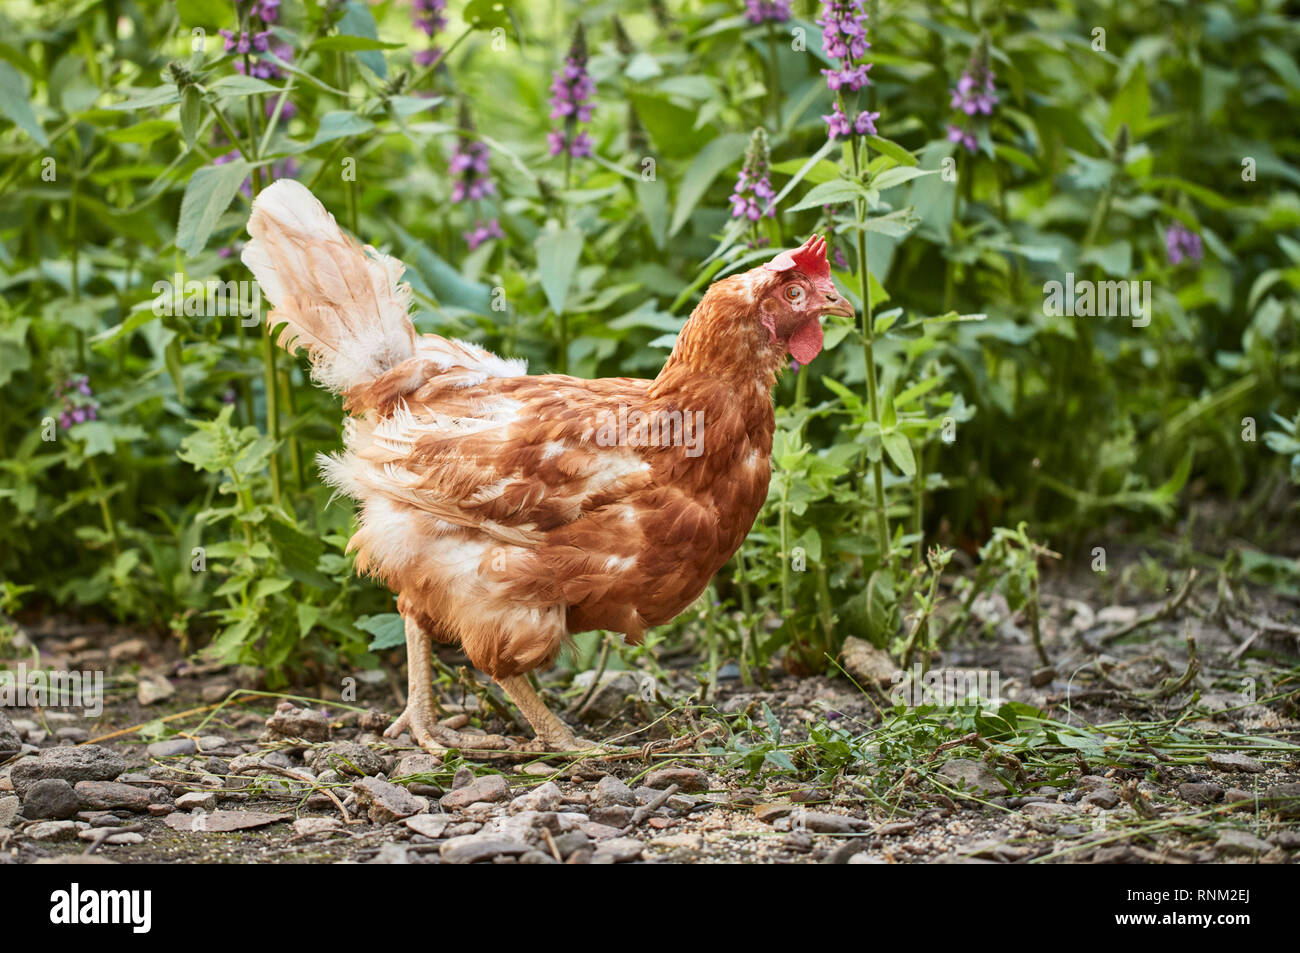 Domestic Chicken. Hen with bad plumage. Germany Stock Photo